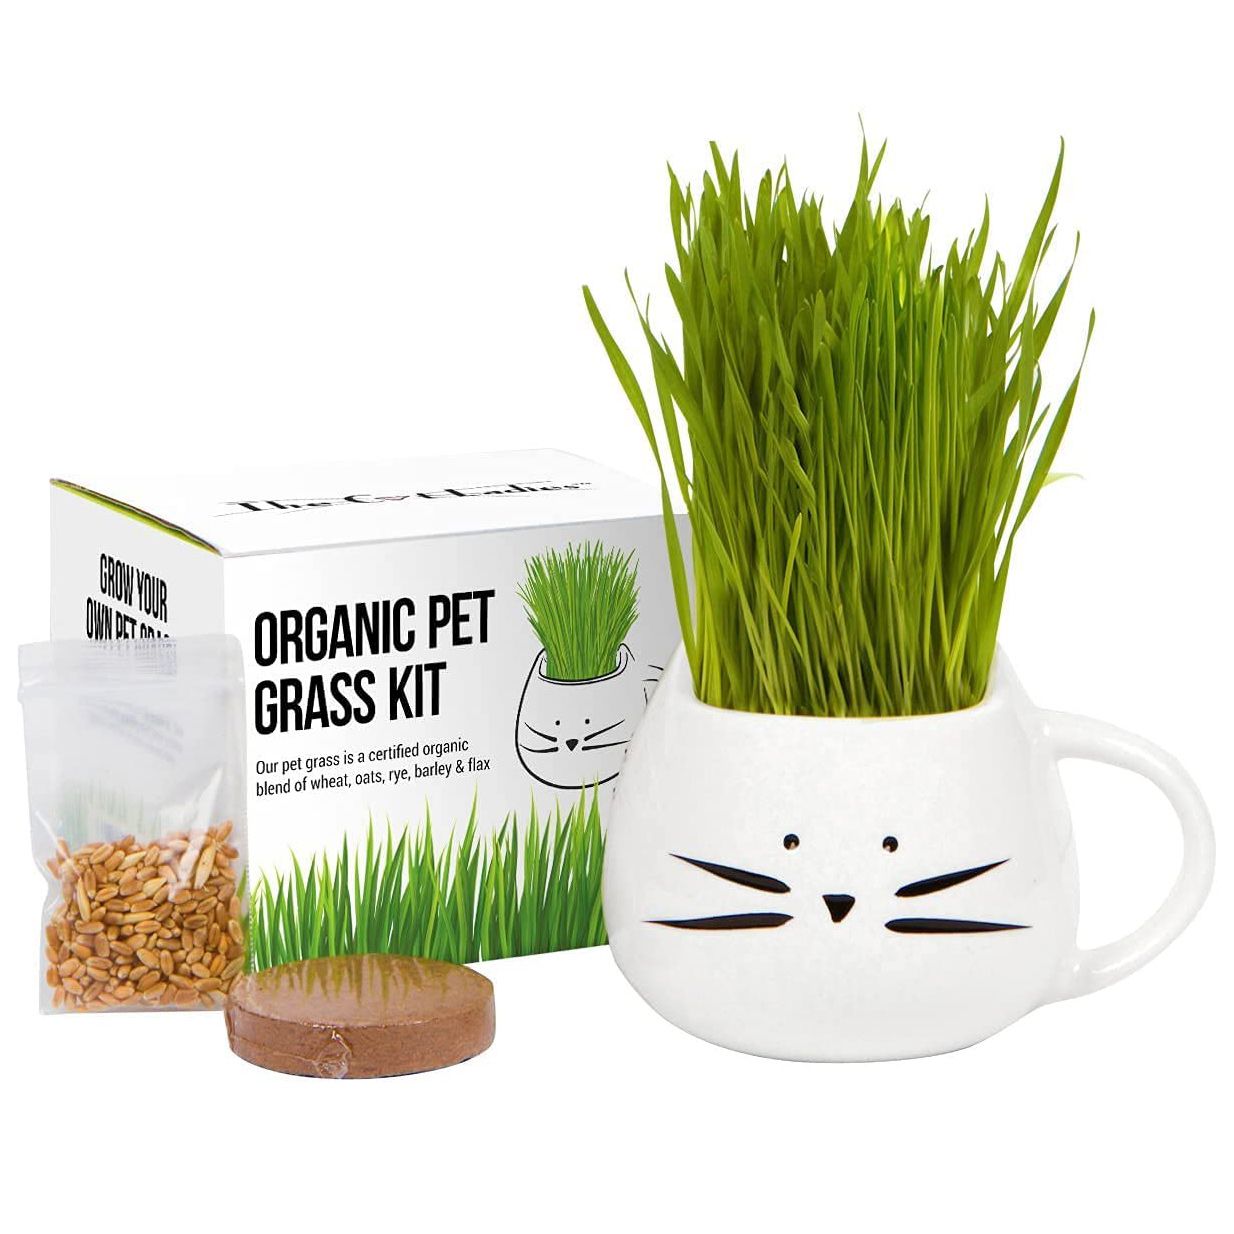 Product photo of a Organic Cat Grass Growing Kit